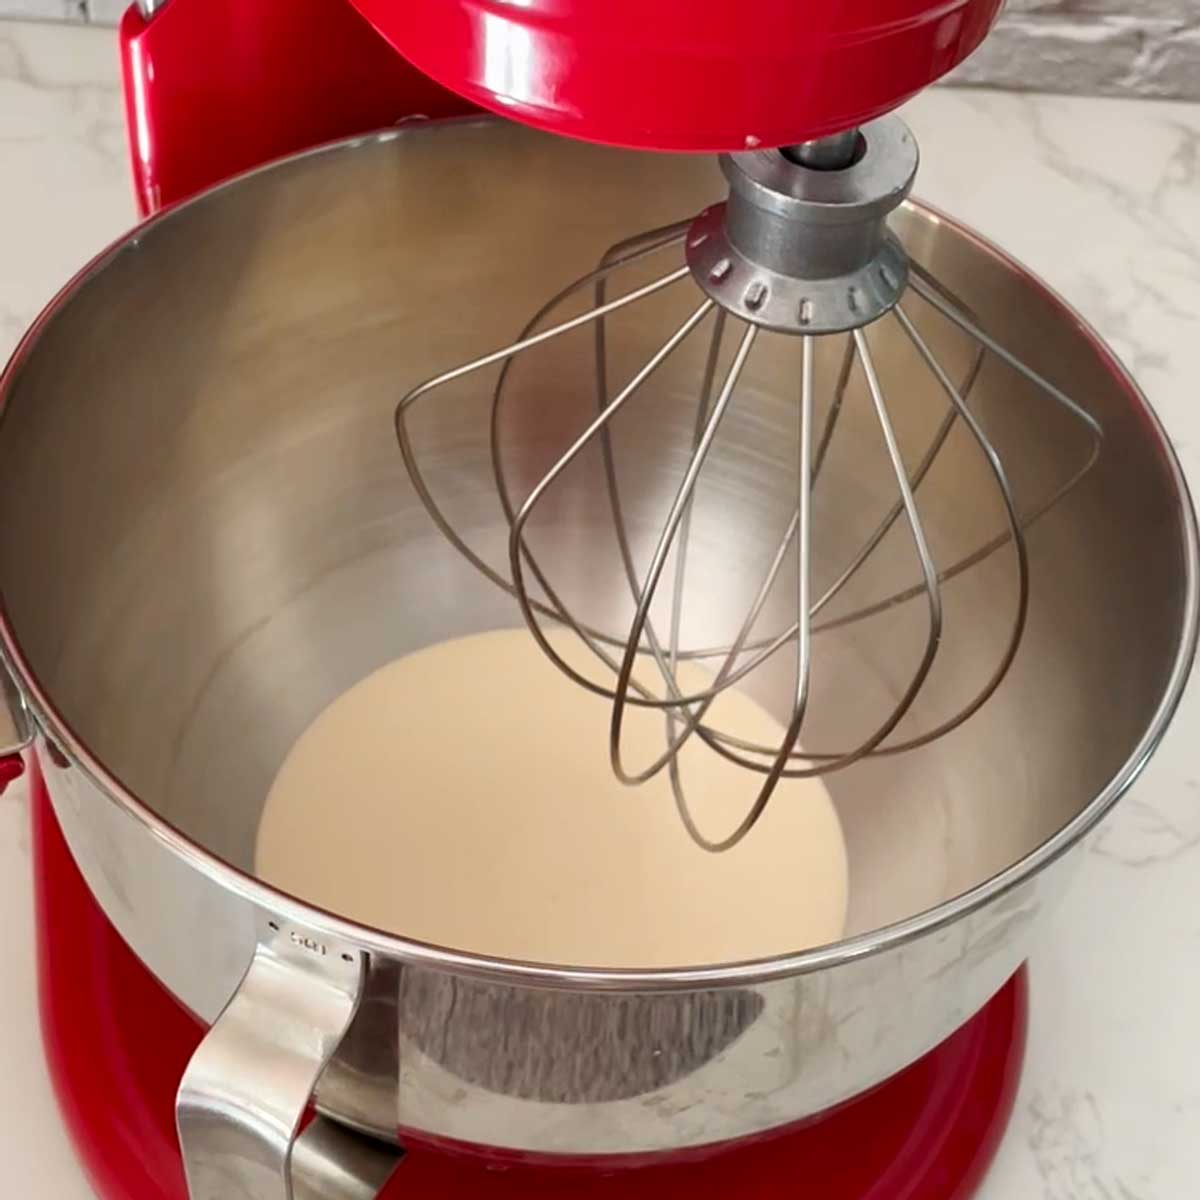 Cream in a stand mixer bowl.